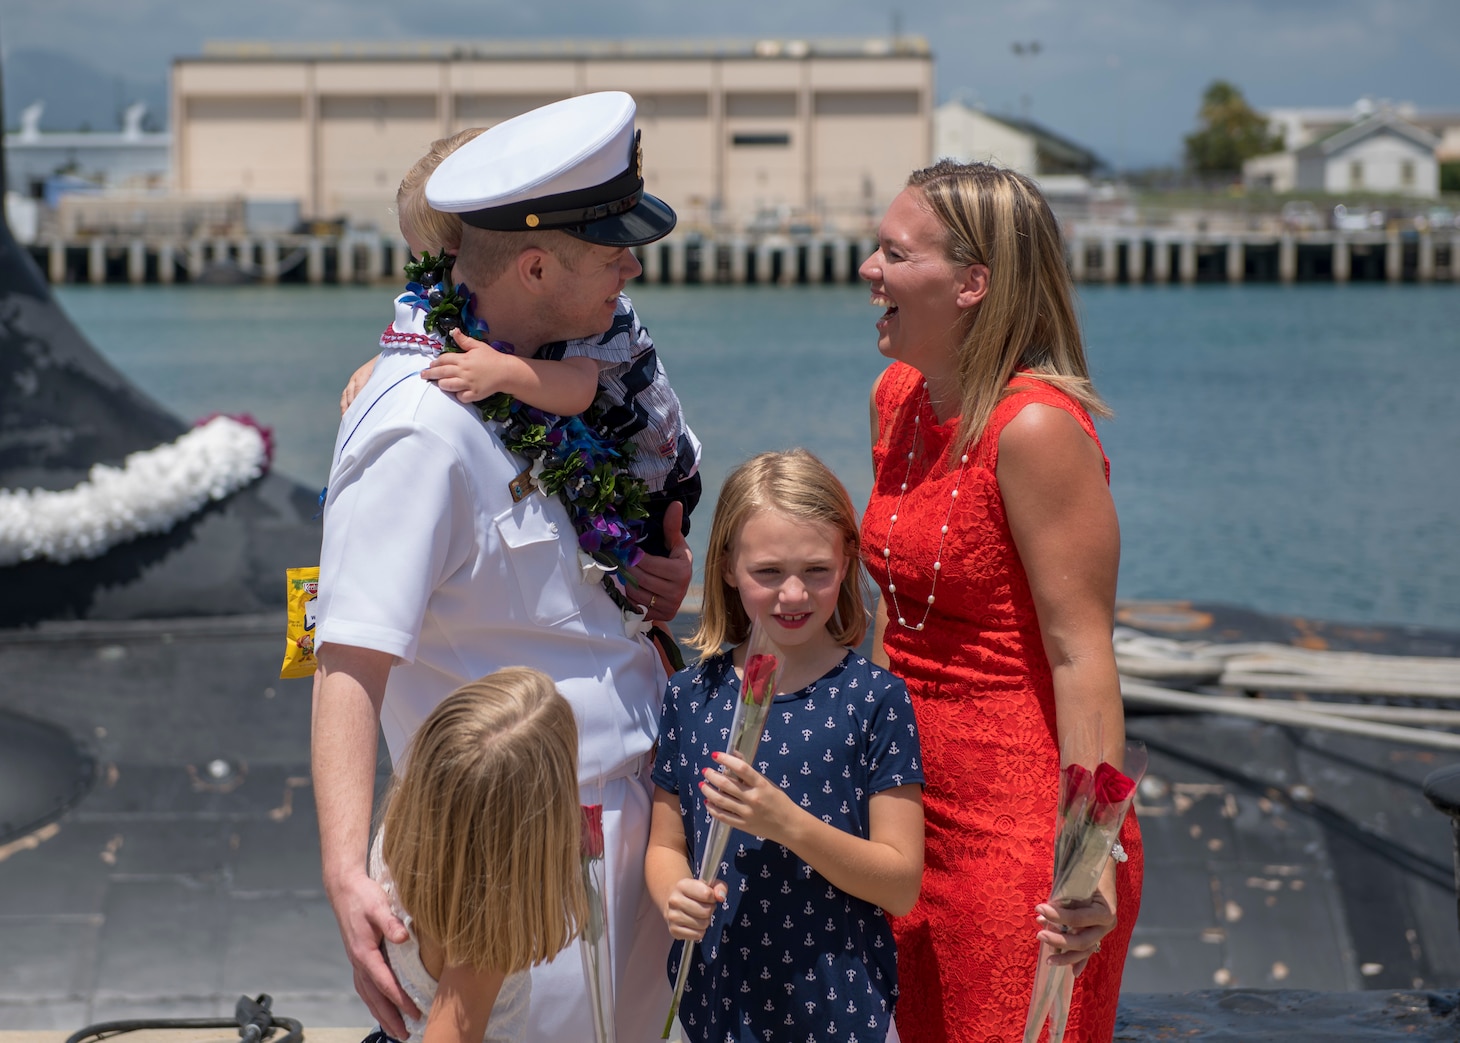 180330-N-LY160-0182 PEARL HARBOR, Hawaii (March 30, 2018) Chief Electronics Technician Nuclear Christopher Fendley, assigned to the Virginia-class fast-attack submarine USS Mississippi (SSN 782), greets his family during a homecoming ceremony in Joint Base Pearl Harbor-Hickam, March 30. Mississippi successfully completed a six-month Western Pacific deployment. (U.S. Navy photo by Mass Communication Specialist 2nd Class Michael H. Lee/ Released)